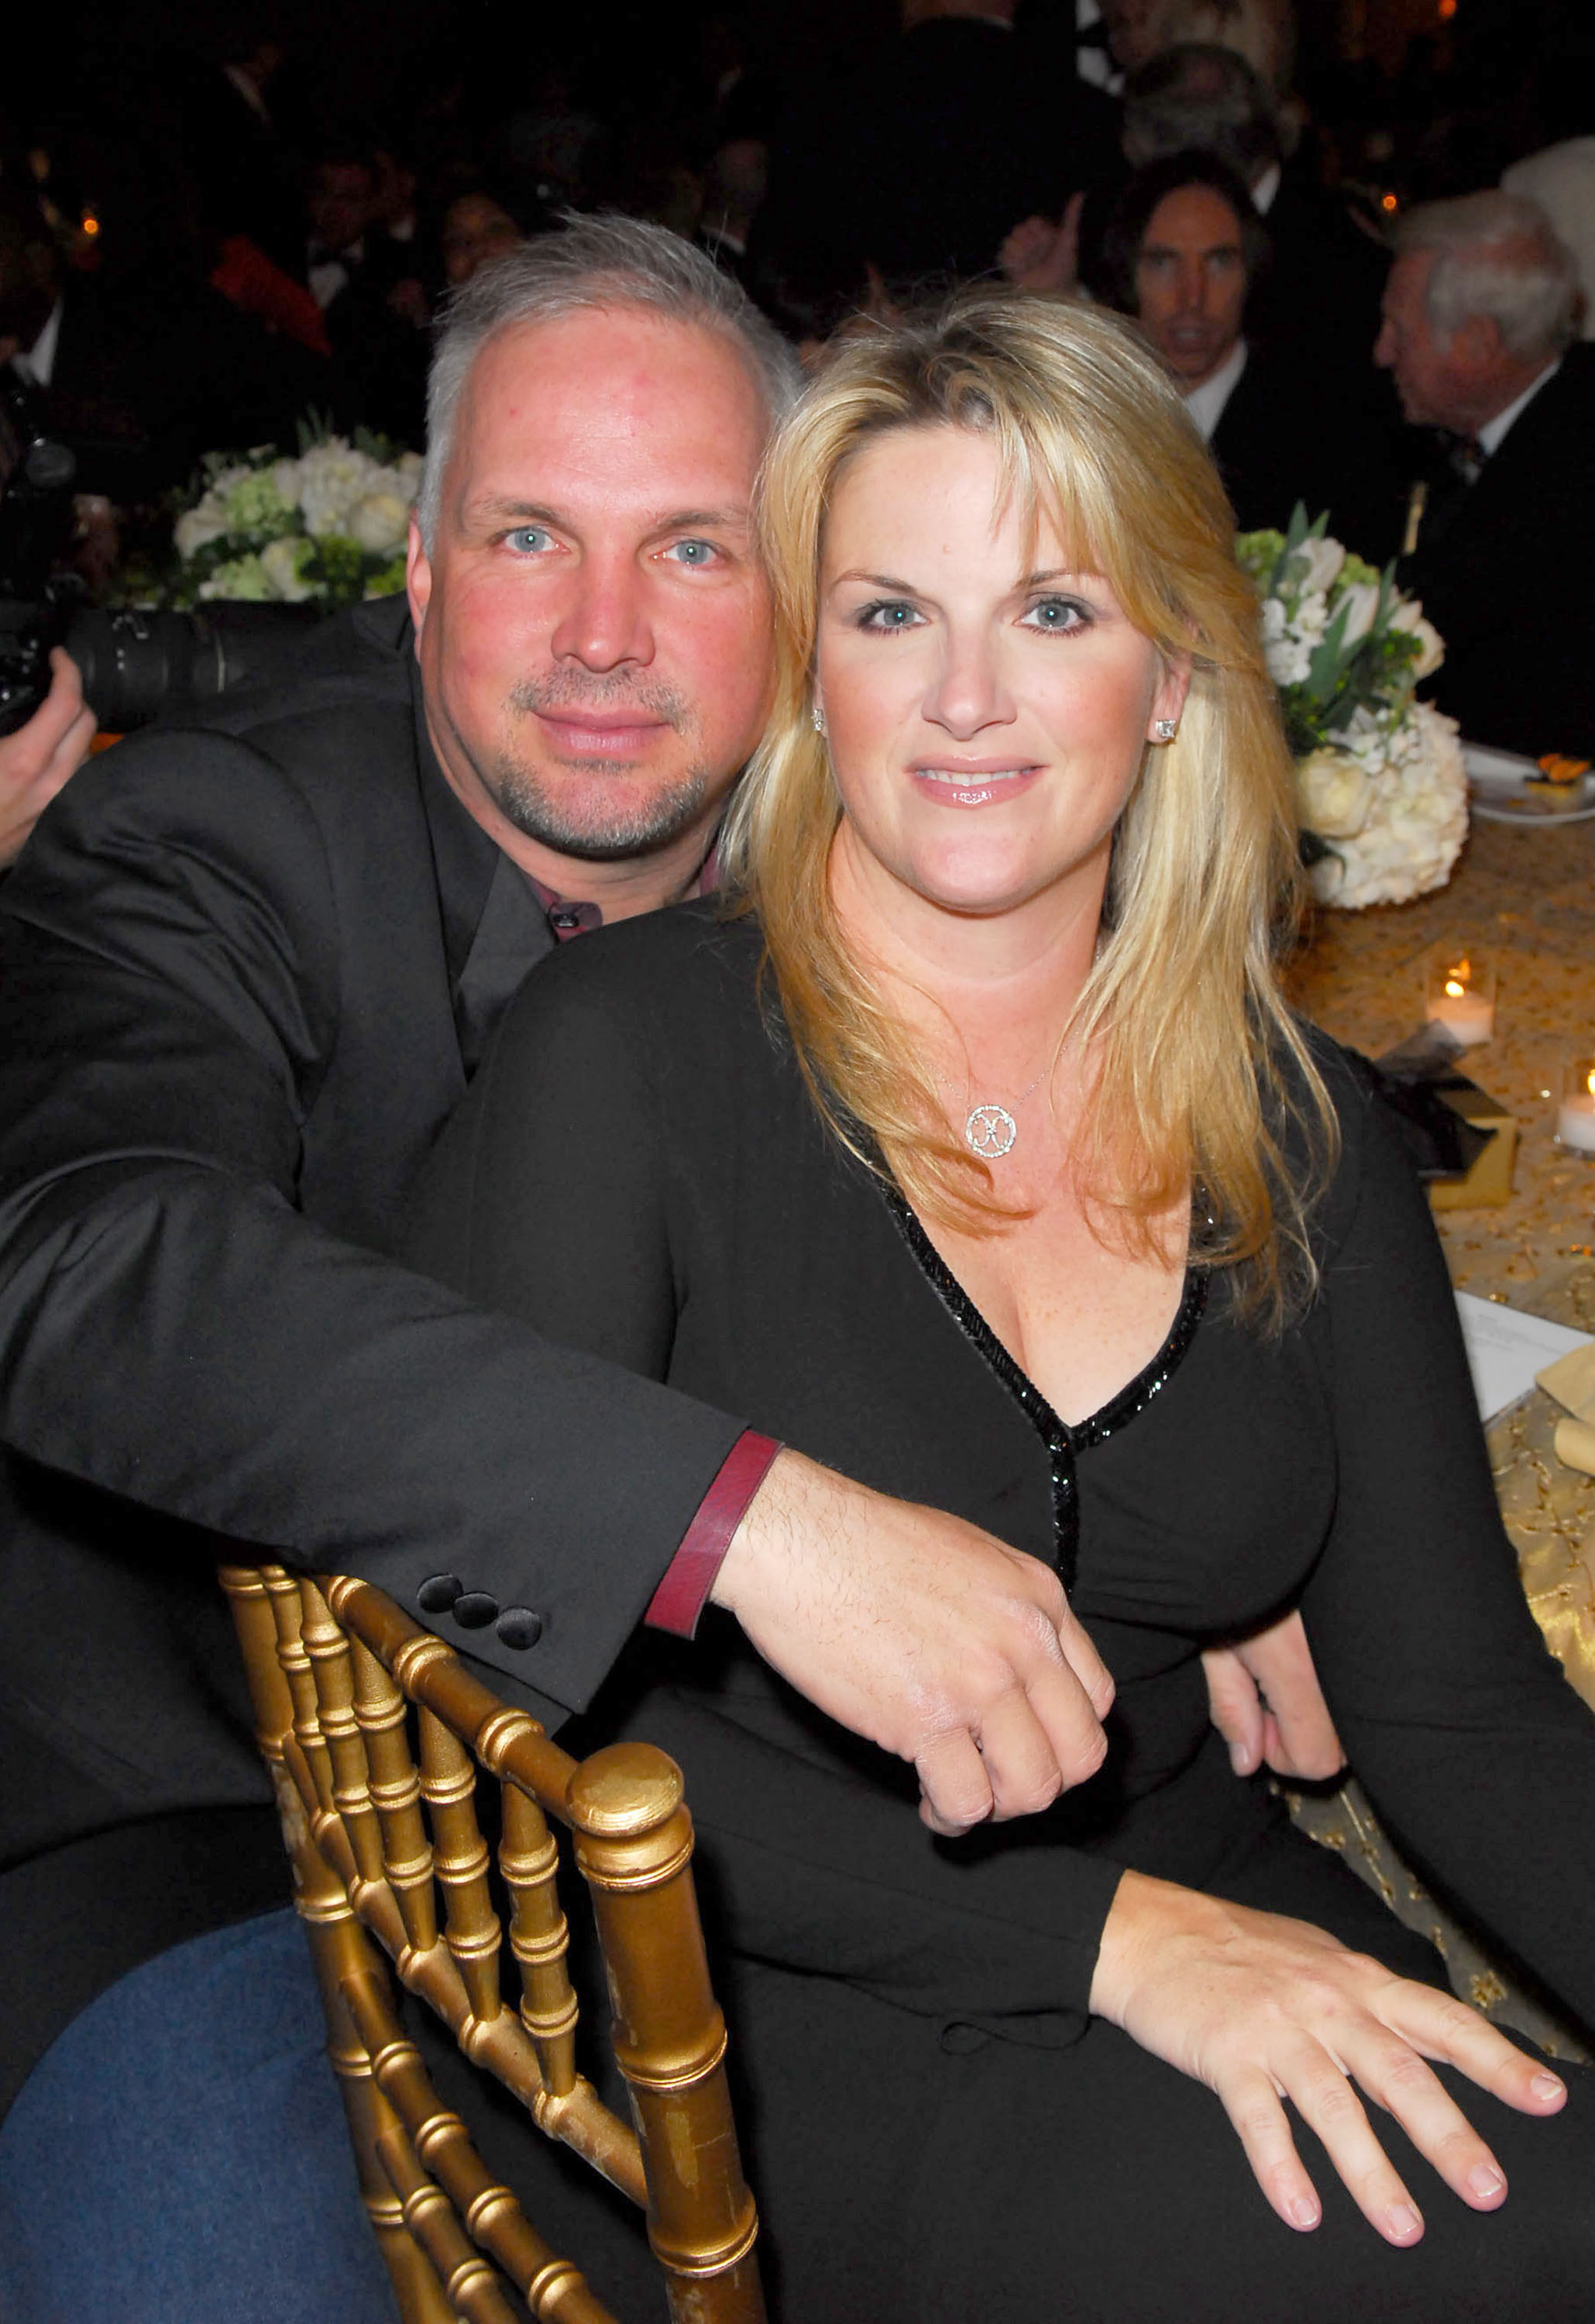 Trisha Yearwood and Garth Brooks at Muhammad Ali's Celebrity Fight Night XII in 2006 | Source: Getty Images